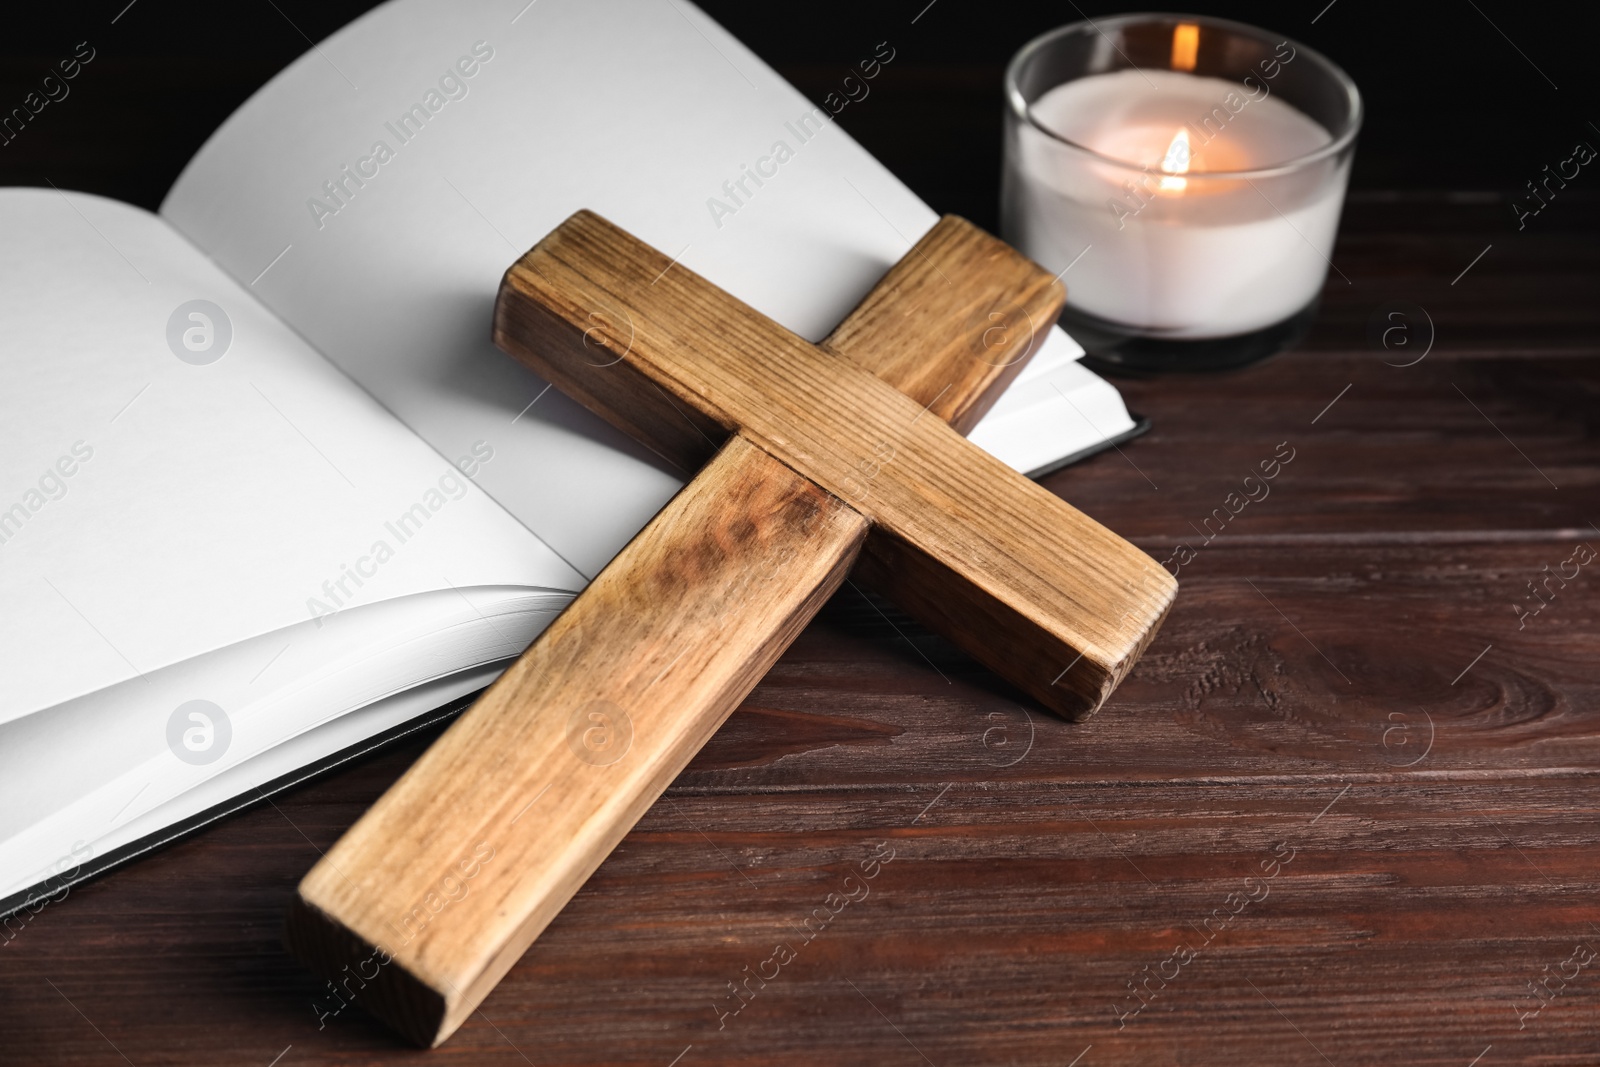 Photo of Cross, Bible and burning candle on wooden background, closeup. Christian religion